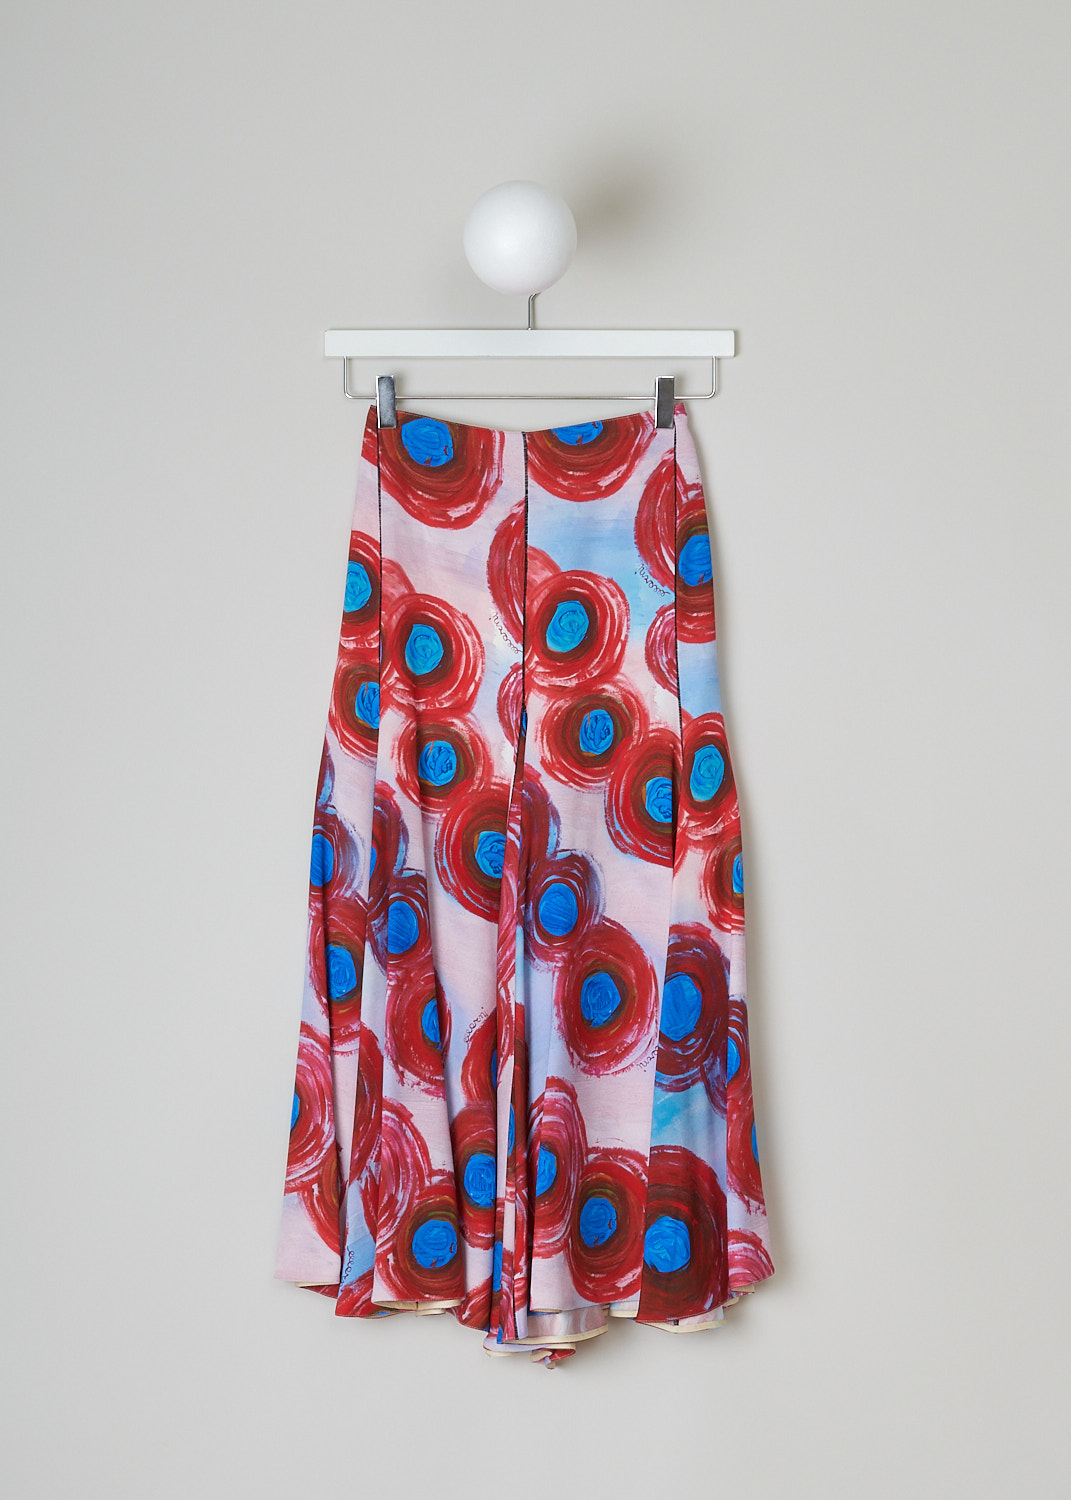 MARNI, BUCHI ROSSI MIDI SKIRT, GOMA0550A0_UTV976_BRR64, Pink, Blue, Print, Front, This high-waisted midi skirt has a pink base color with painterly red and blue dots throughout. In the back, a hook-and eye and concealed zip functions as the closure. The flared skirt has pleats from the waist down to the asymmetric hem.   
